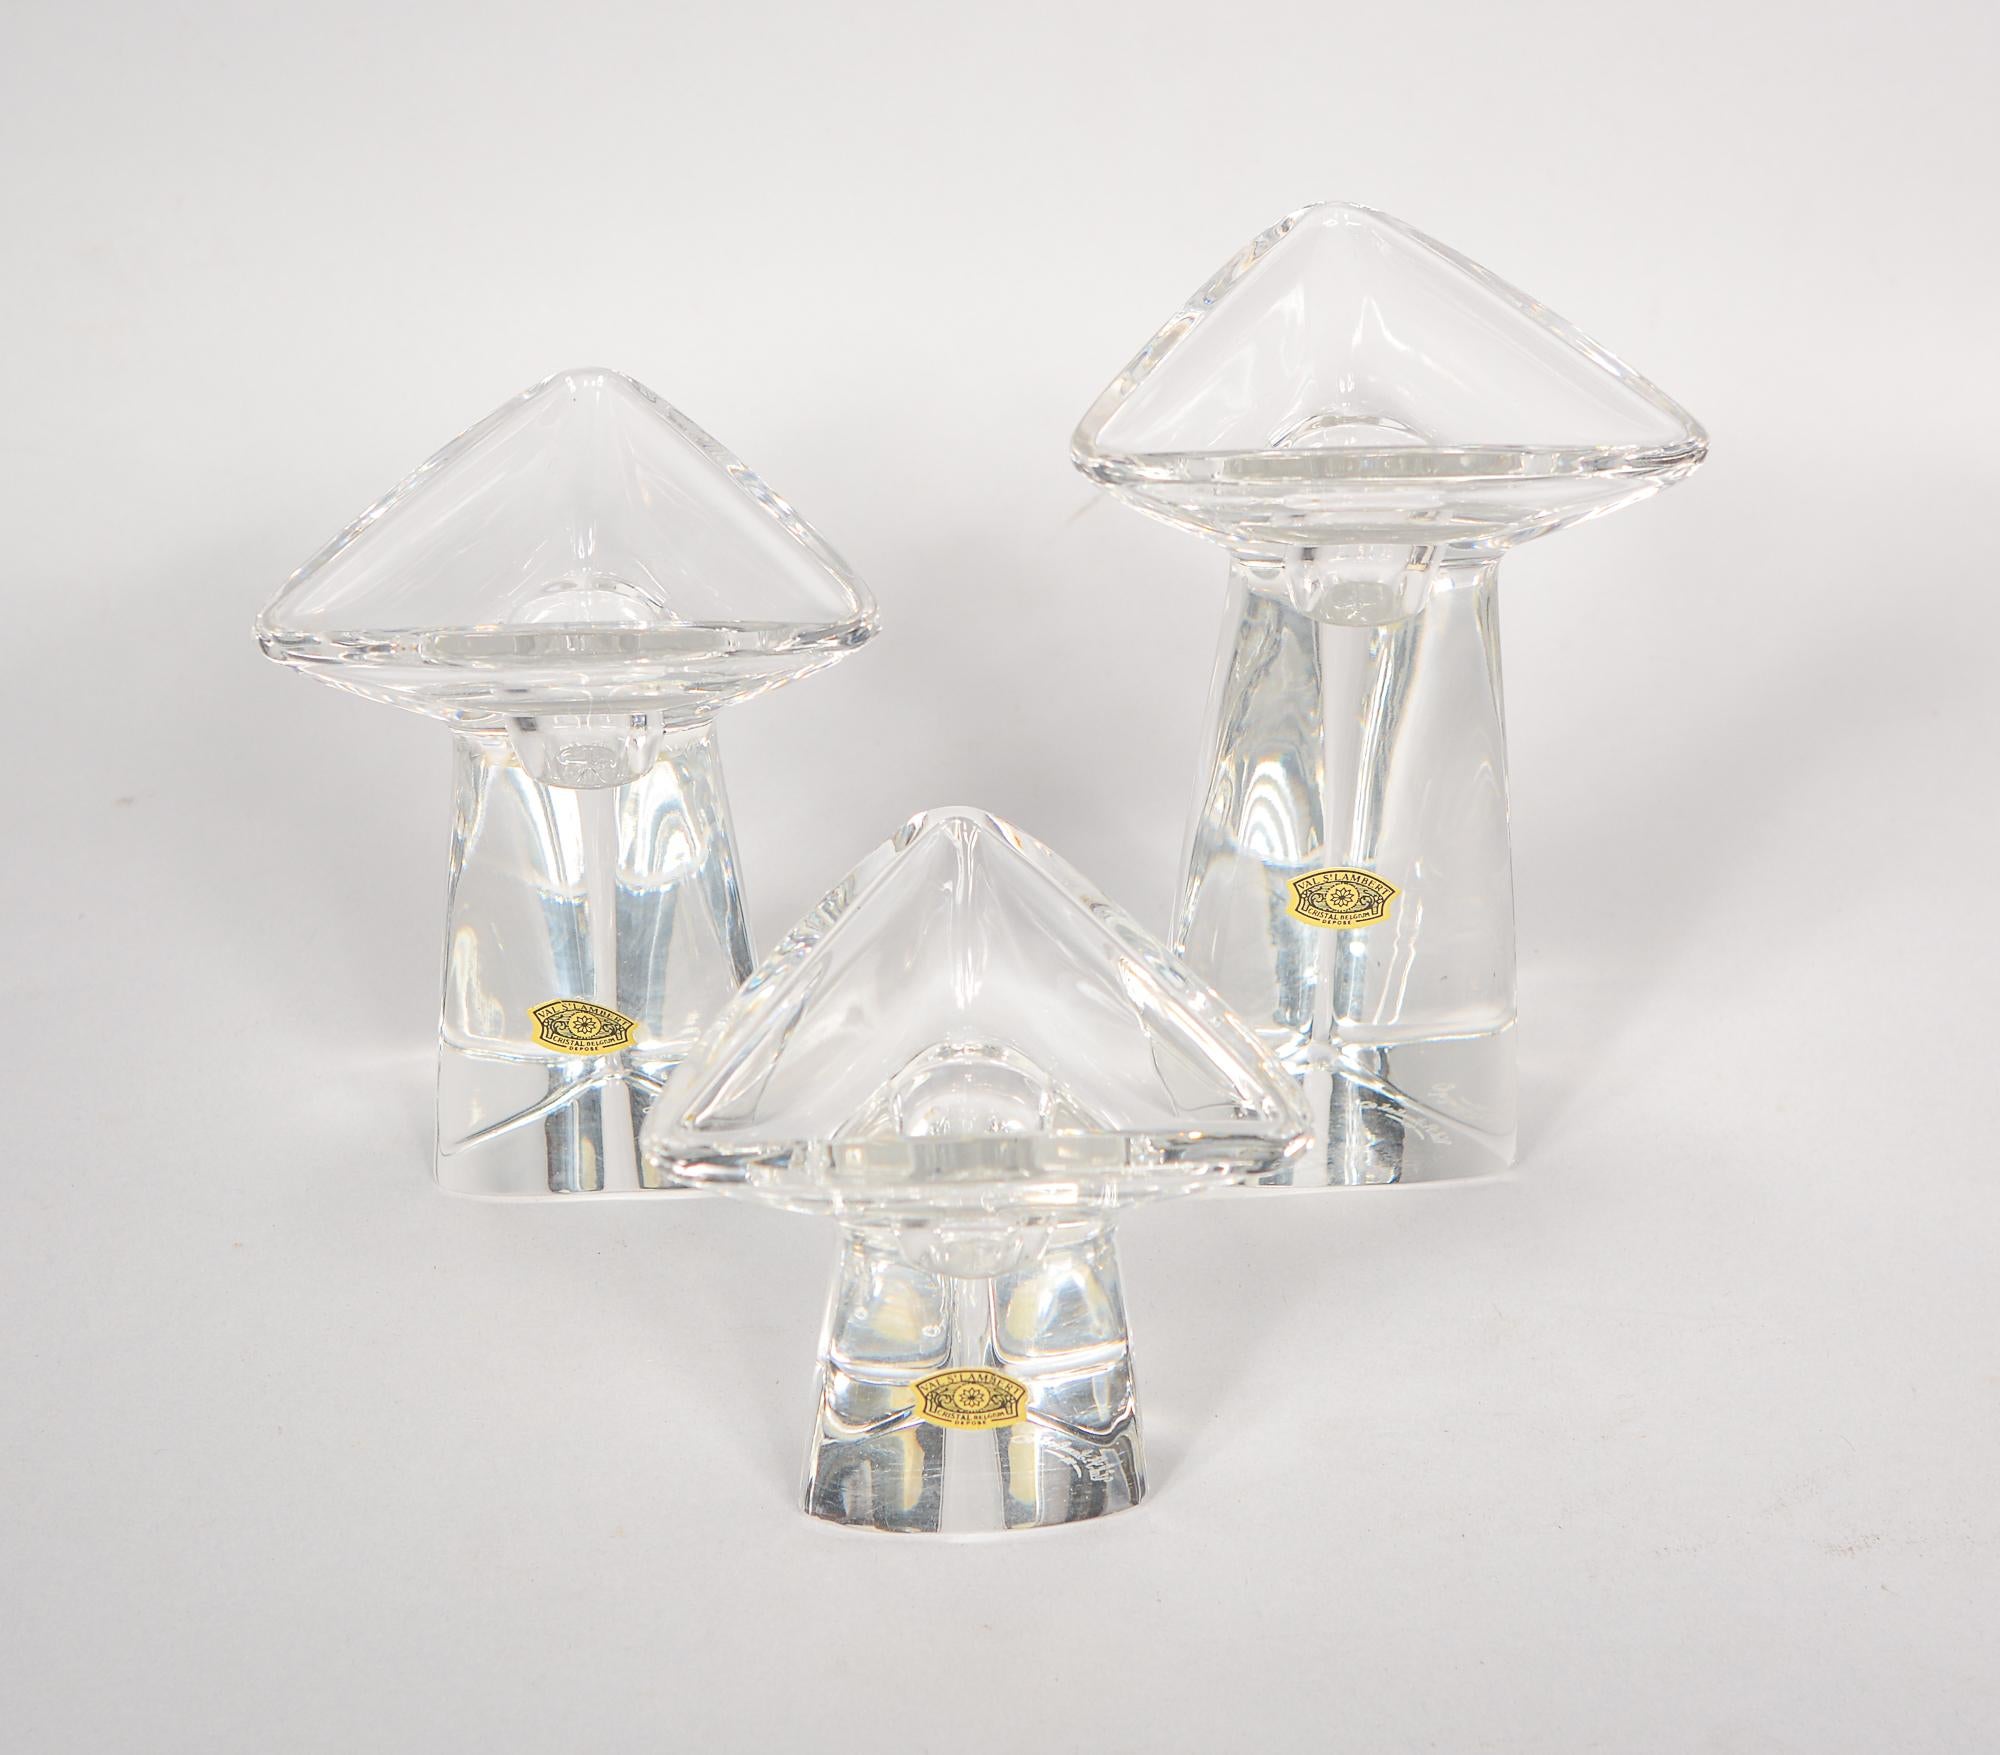 Set of three Tricorne crystal candlesticks made by Val St Lambert of Belgium. These were designed in 1956 by Peter Muller-Munk. All three have an etched signature on the bottom as well as retaining the original labels. The dimensions given are for